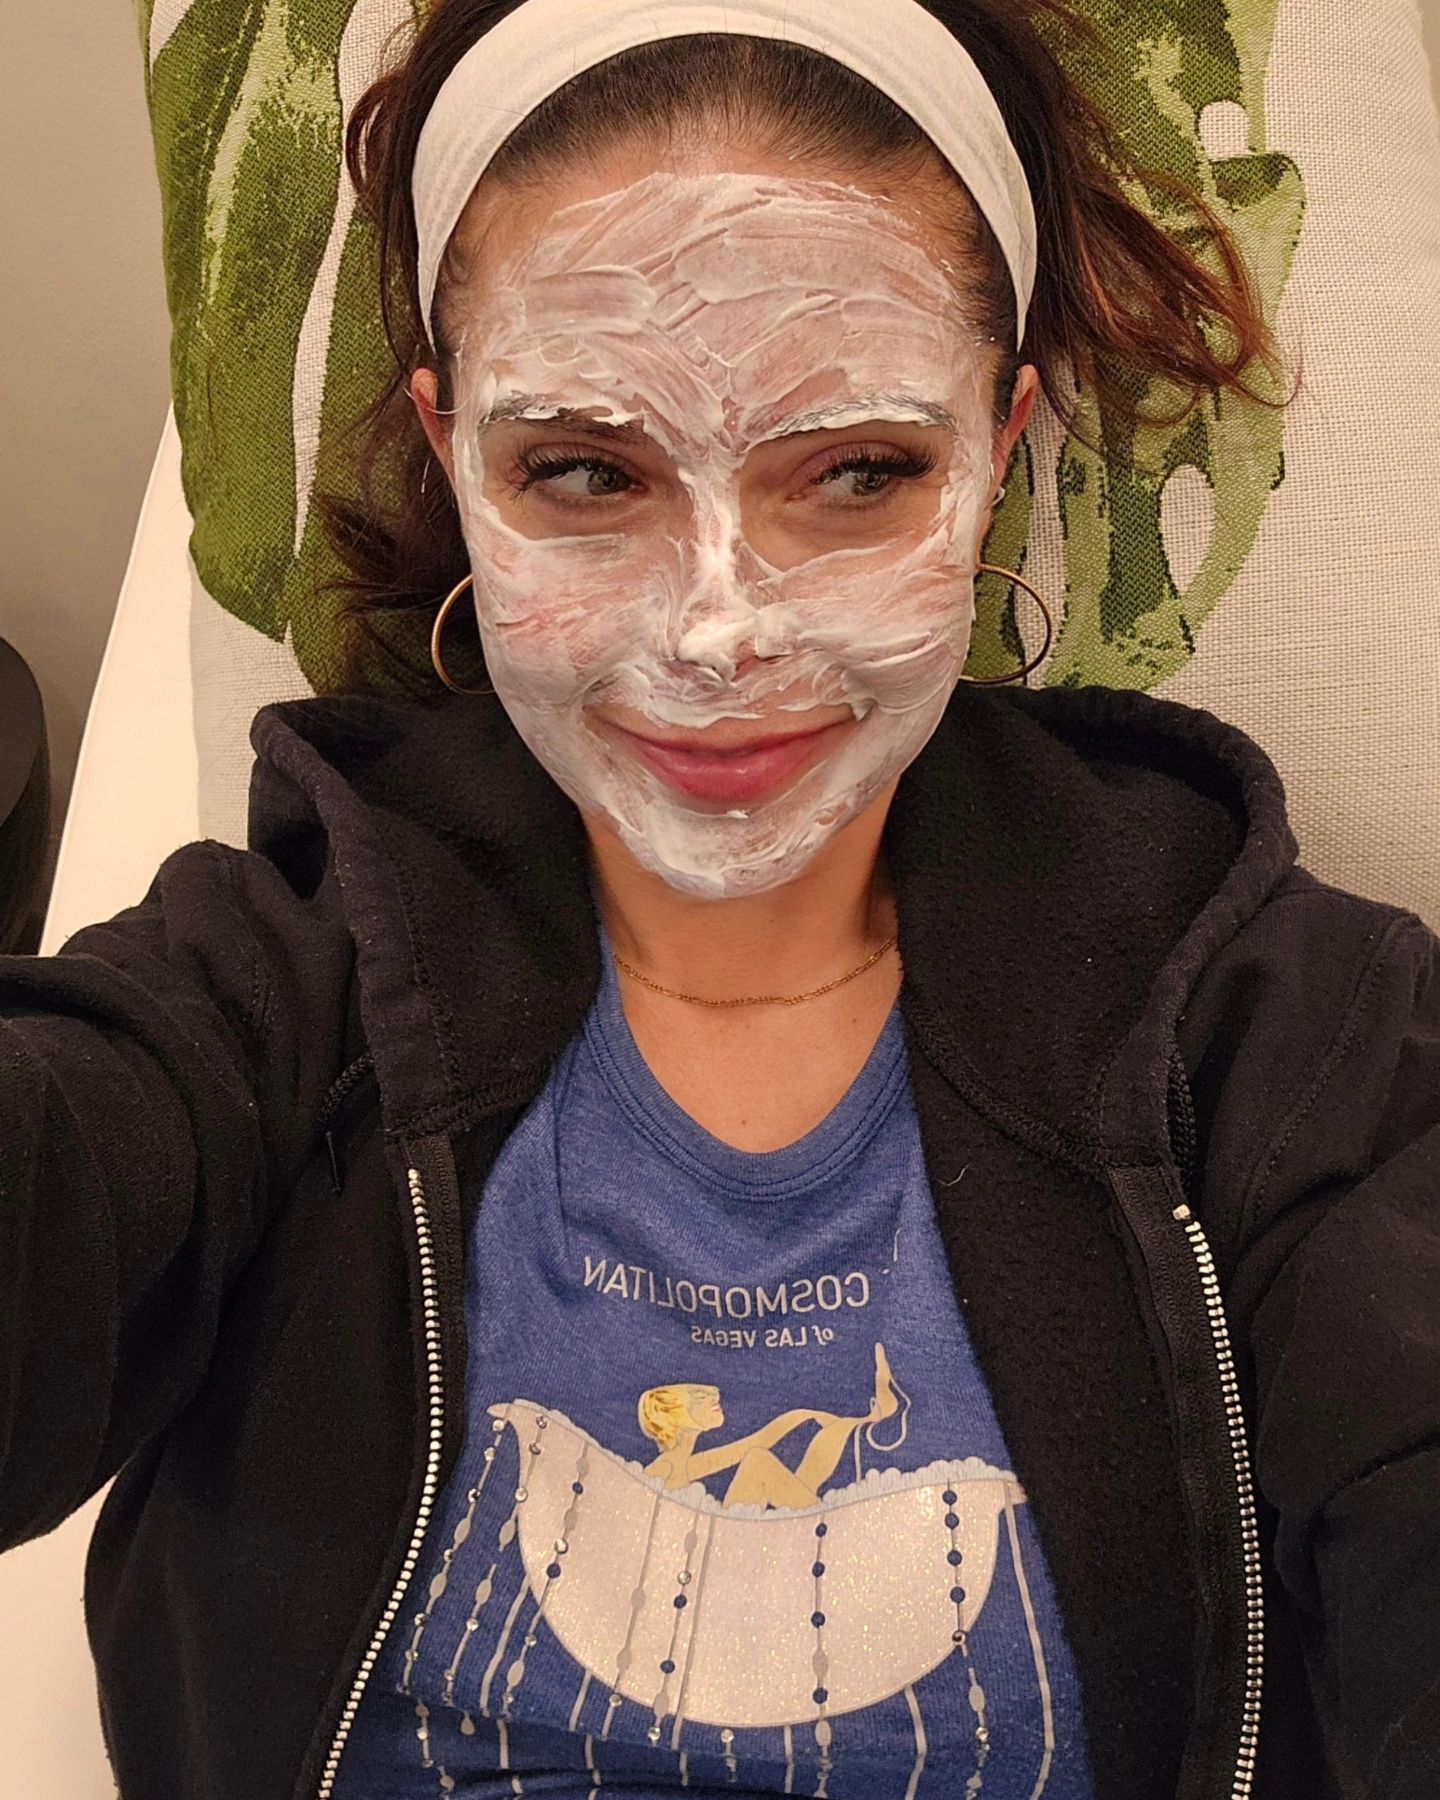 Sometimes you just need to take care of yourself....skincare is super important, especially as we age.